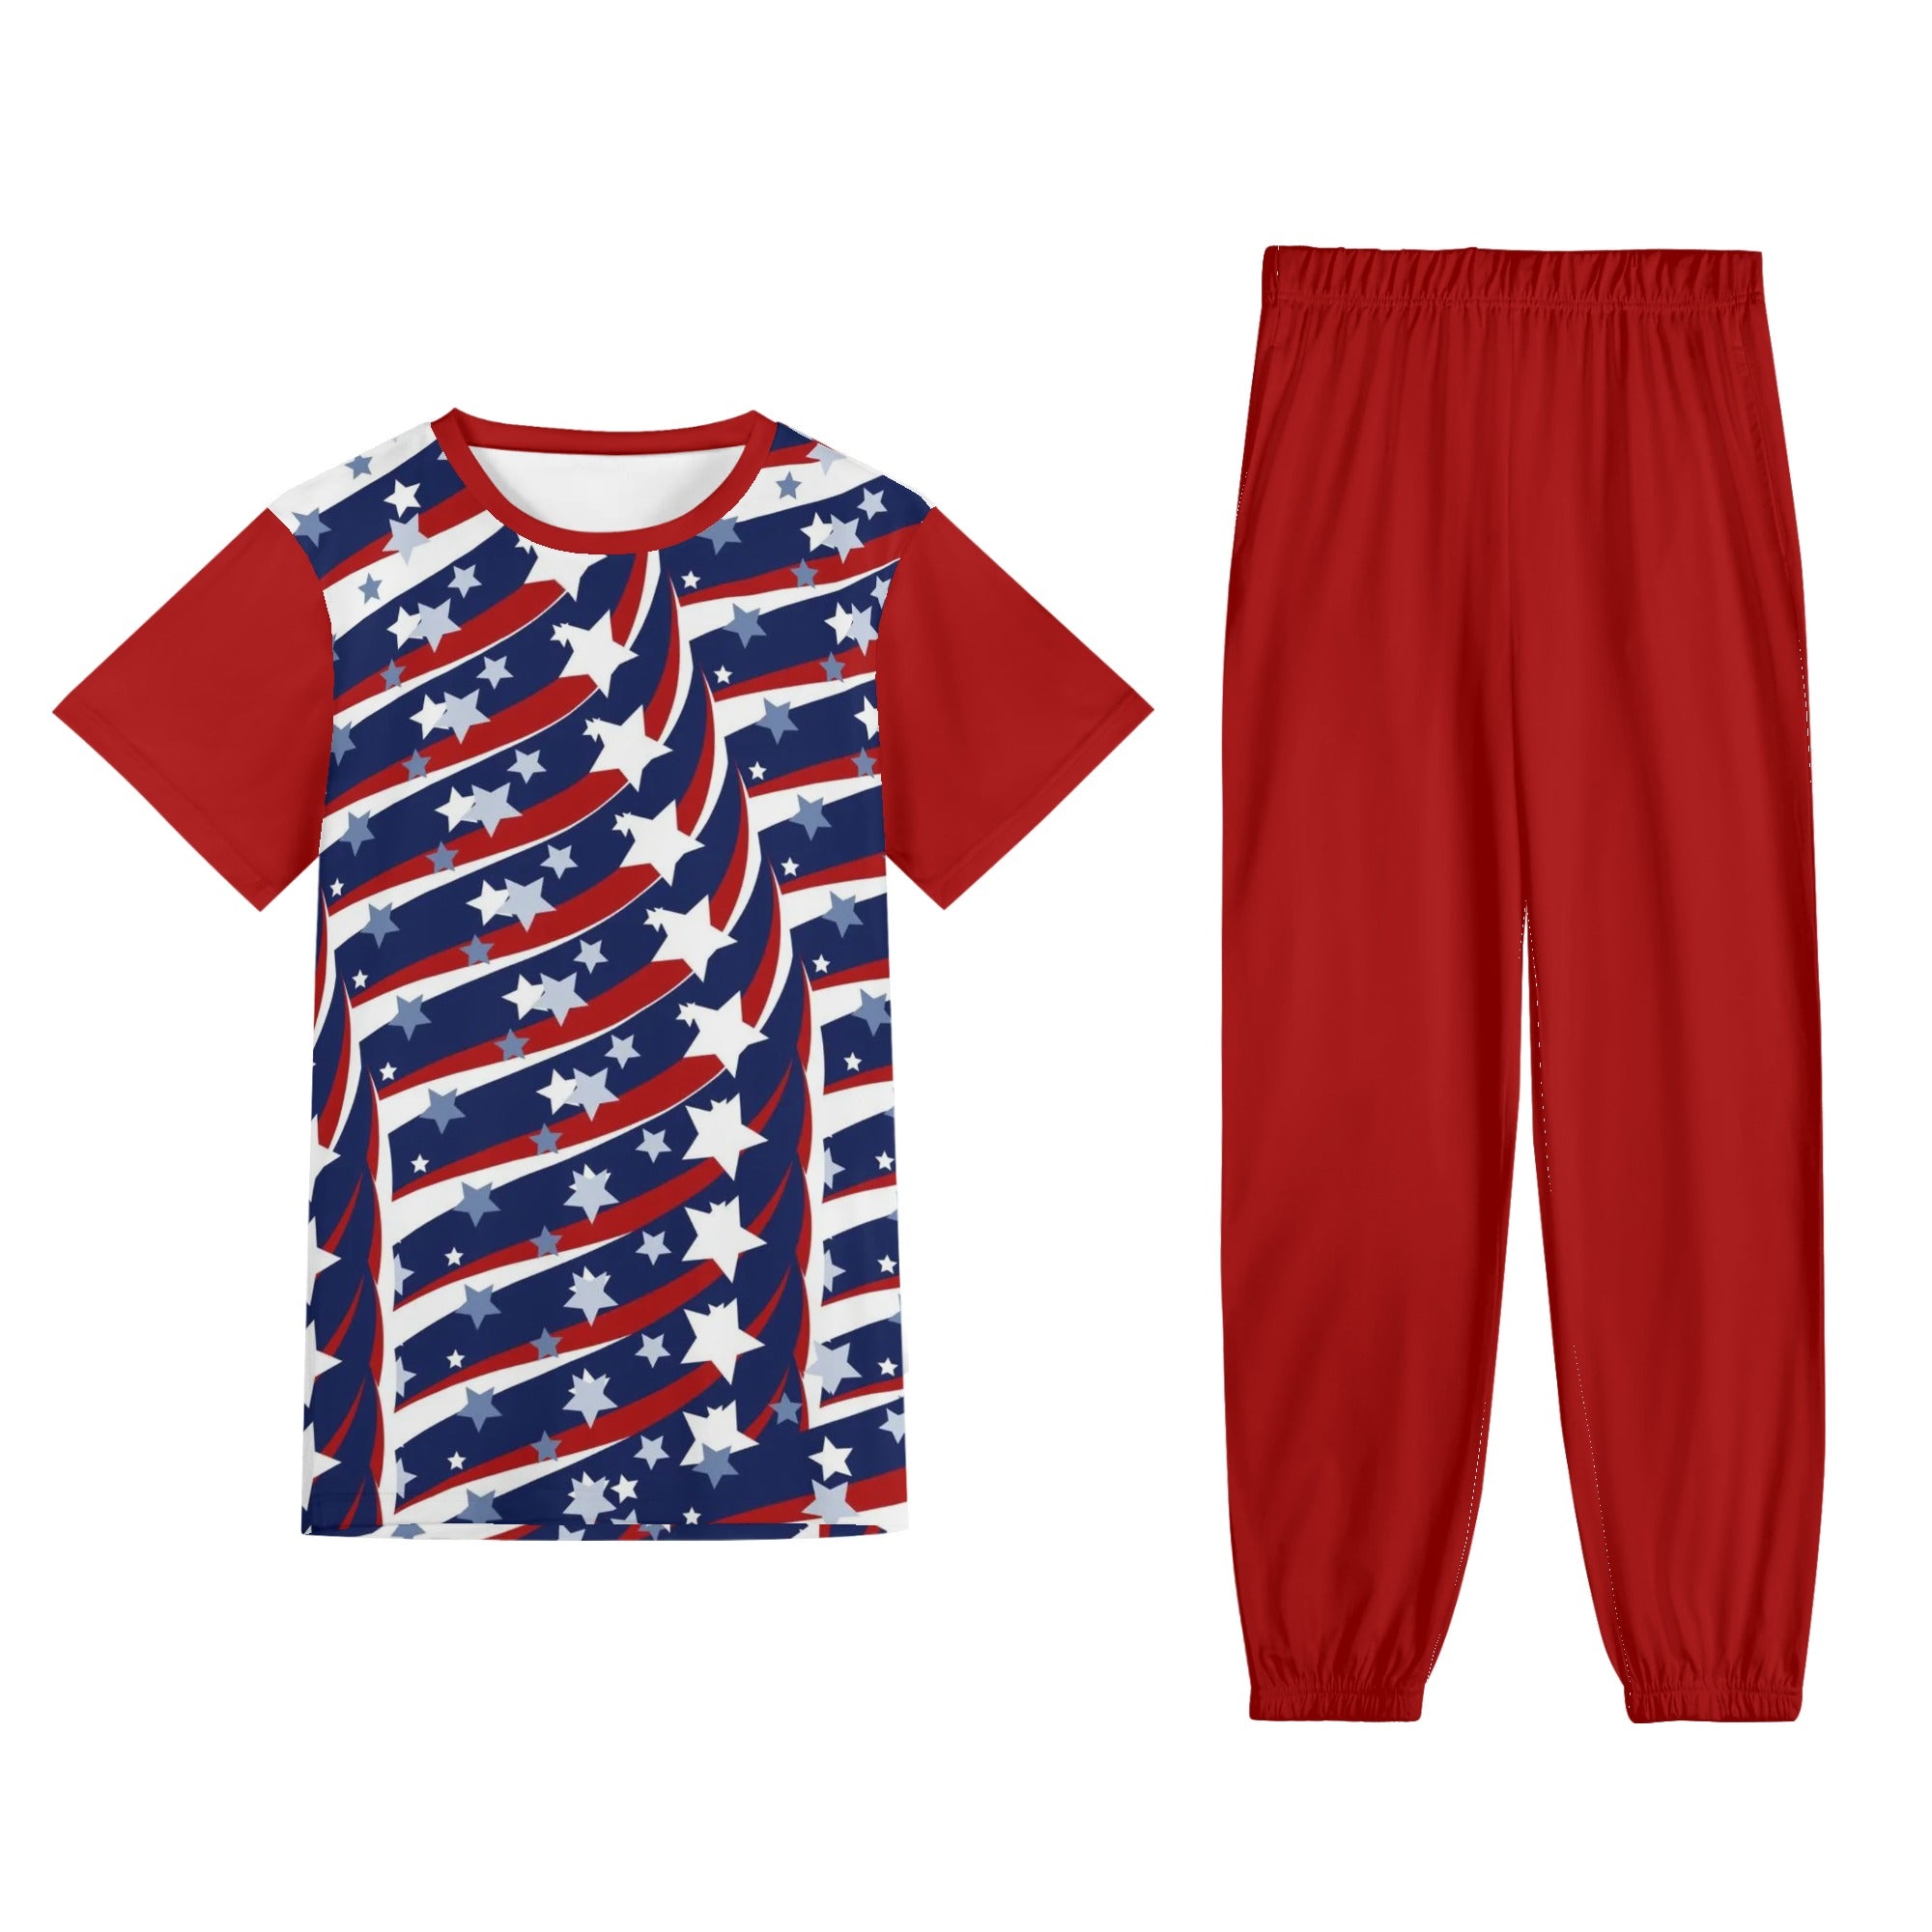 Red - 4th of July Patriotic Short Sleeve Sports Outfit Set - unisex pants set at TFC&H Co.